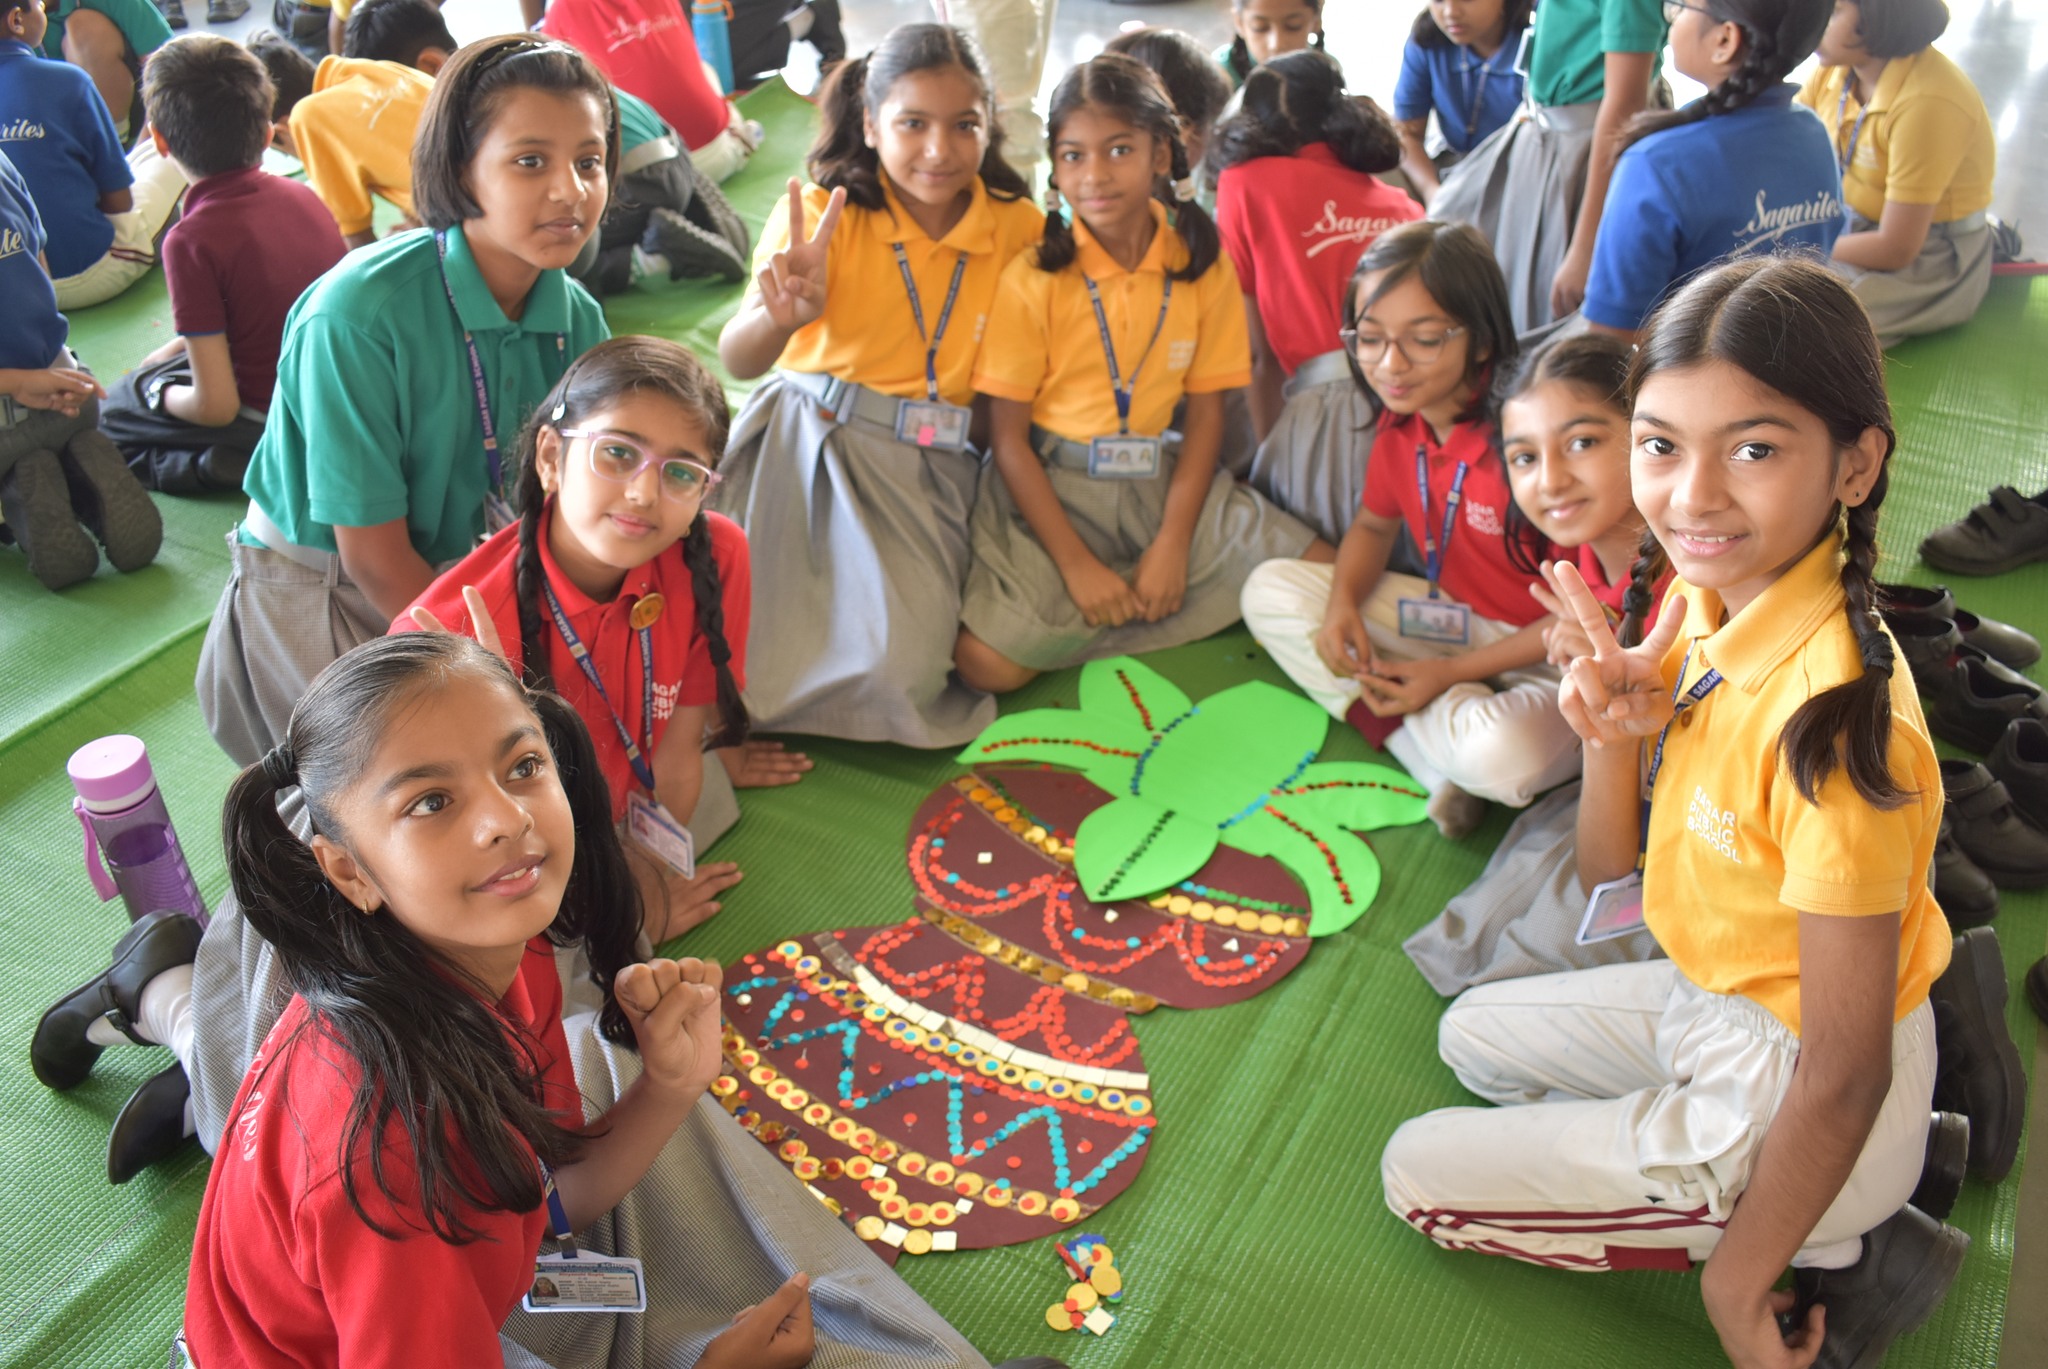 Diwali Celebration with exciting activities